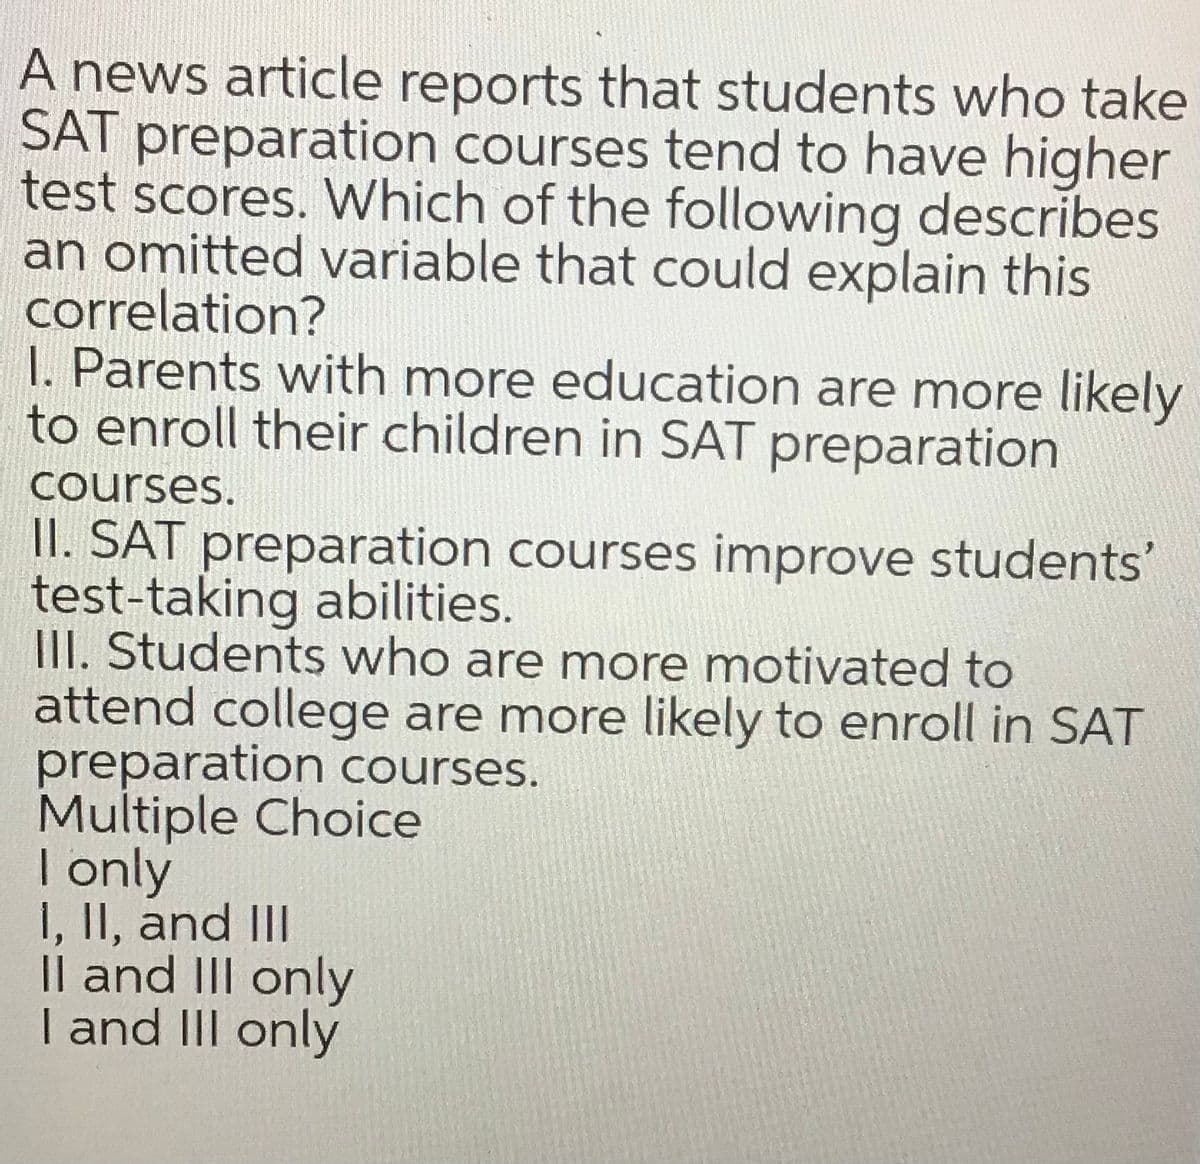 A news article reports that students who take
SAT preparation courses tend to have higher
test scores. Which of the following describes
an omitted variable that could explain this
correlation?
I. Parents with more education are more likely
to enroll their children in SAT preparation
courses.
II. SAT preparation courses improve students'
test-taking abilities.
III. Students who are more motivated to
attend college are more likely to enroll in SAT
preparation courses.
Multiple Choice
| only
I, II, and III
Il and II only
I and II only
